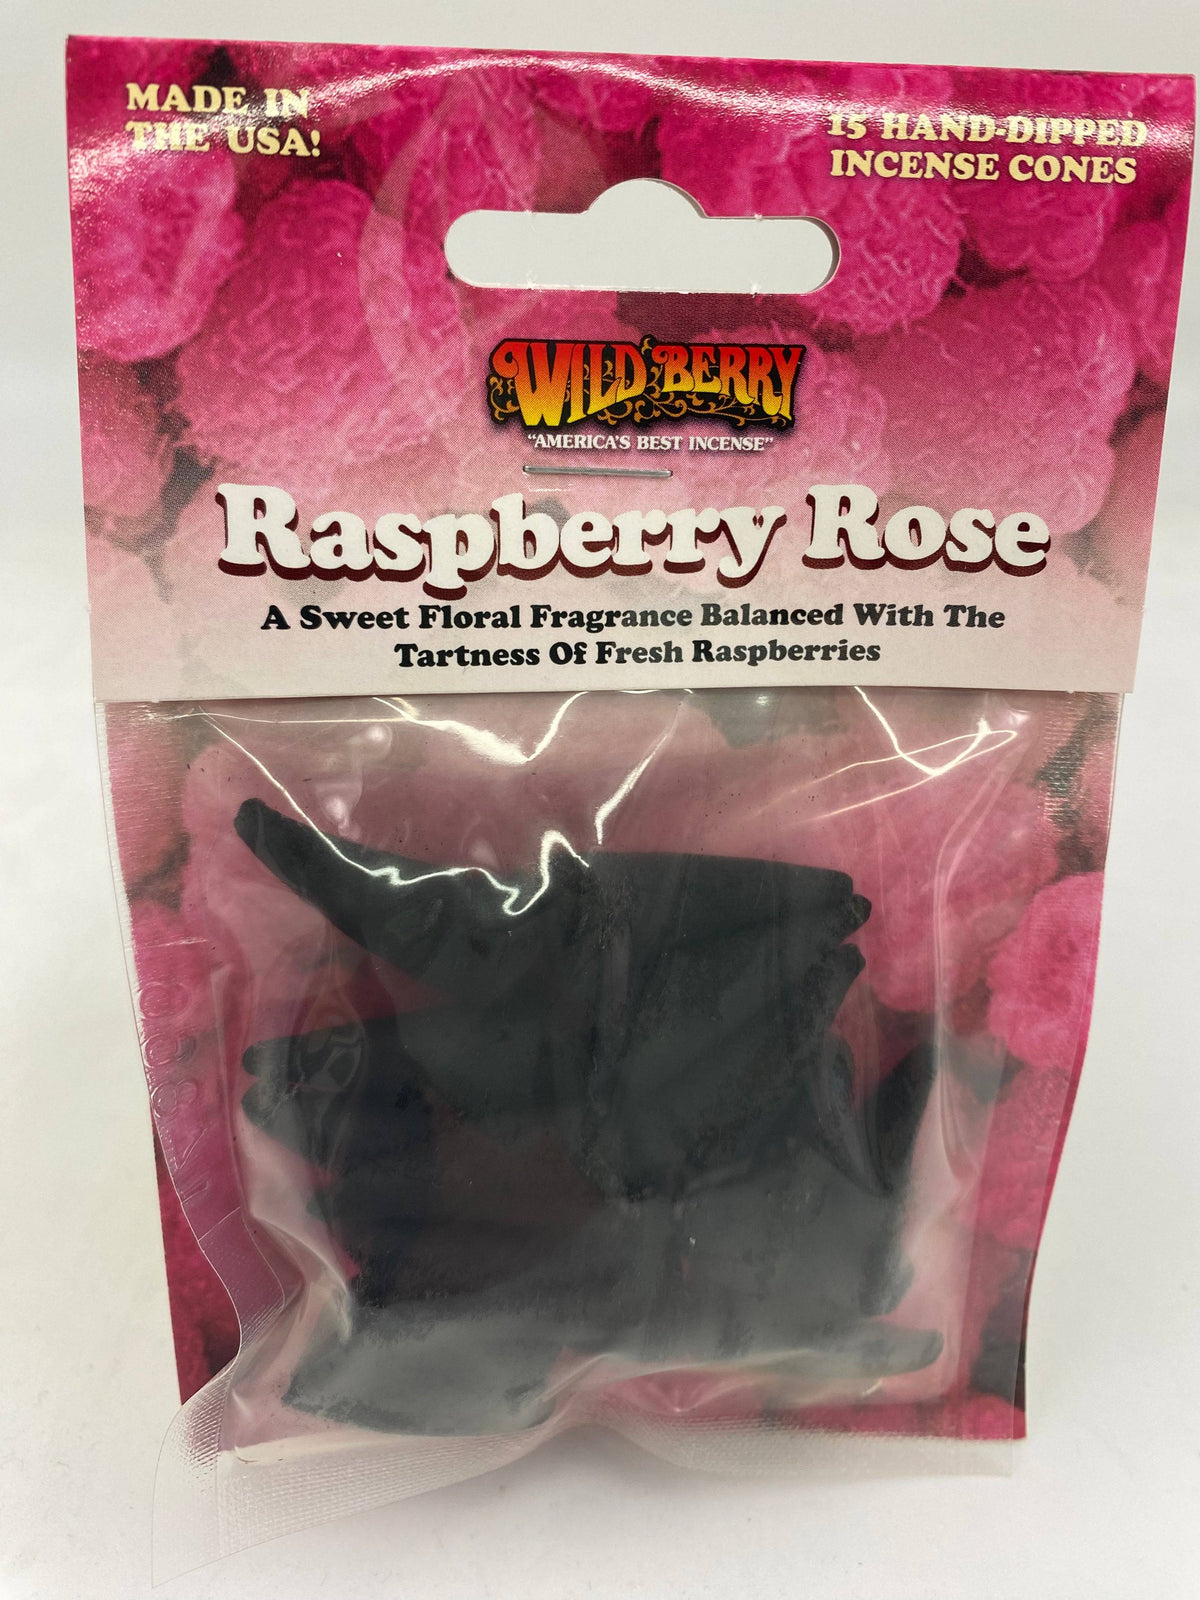 WILDBERRY RASPBERRY ROSE CONES 15ct PACKAGED